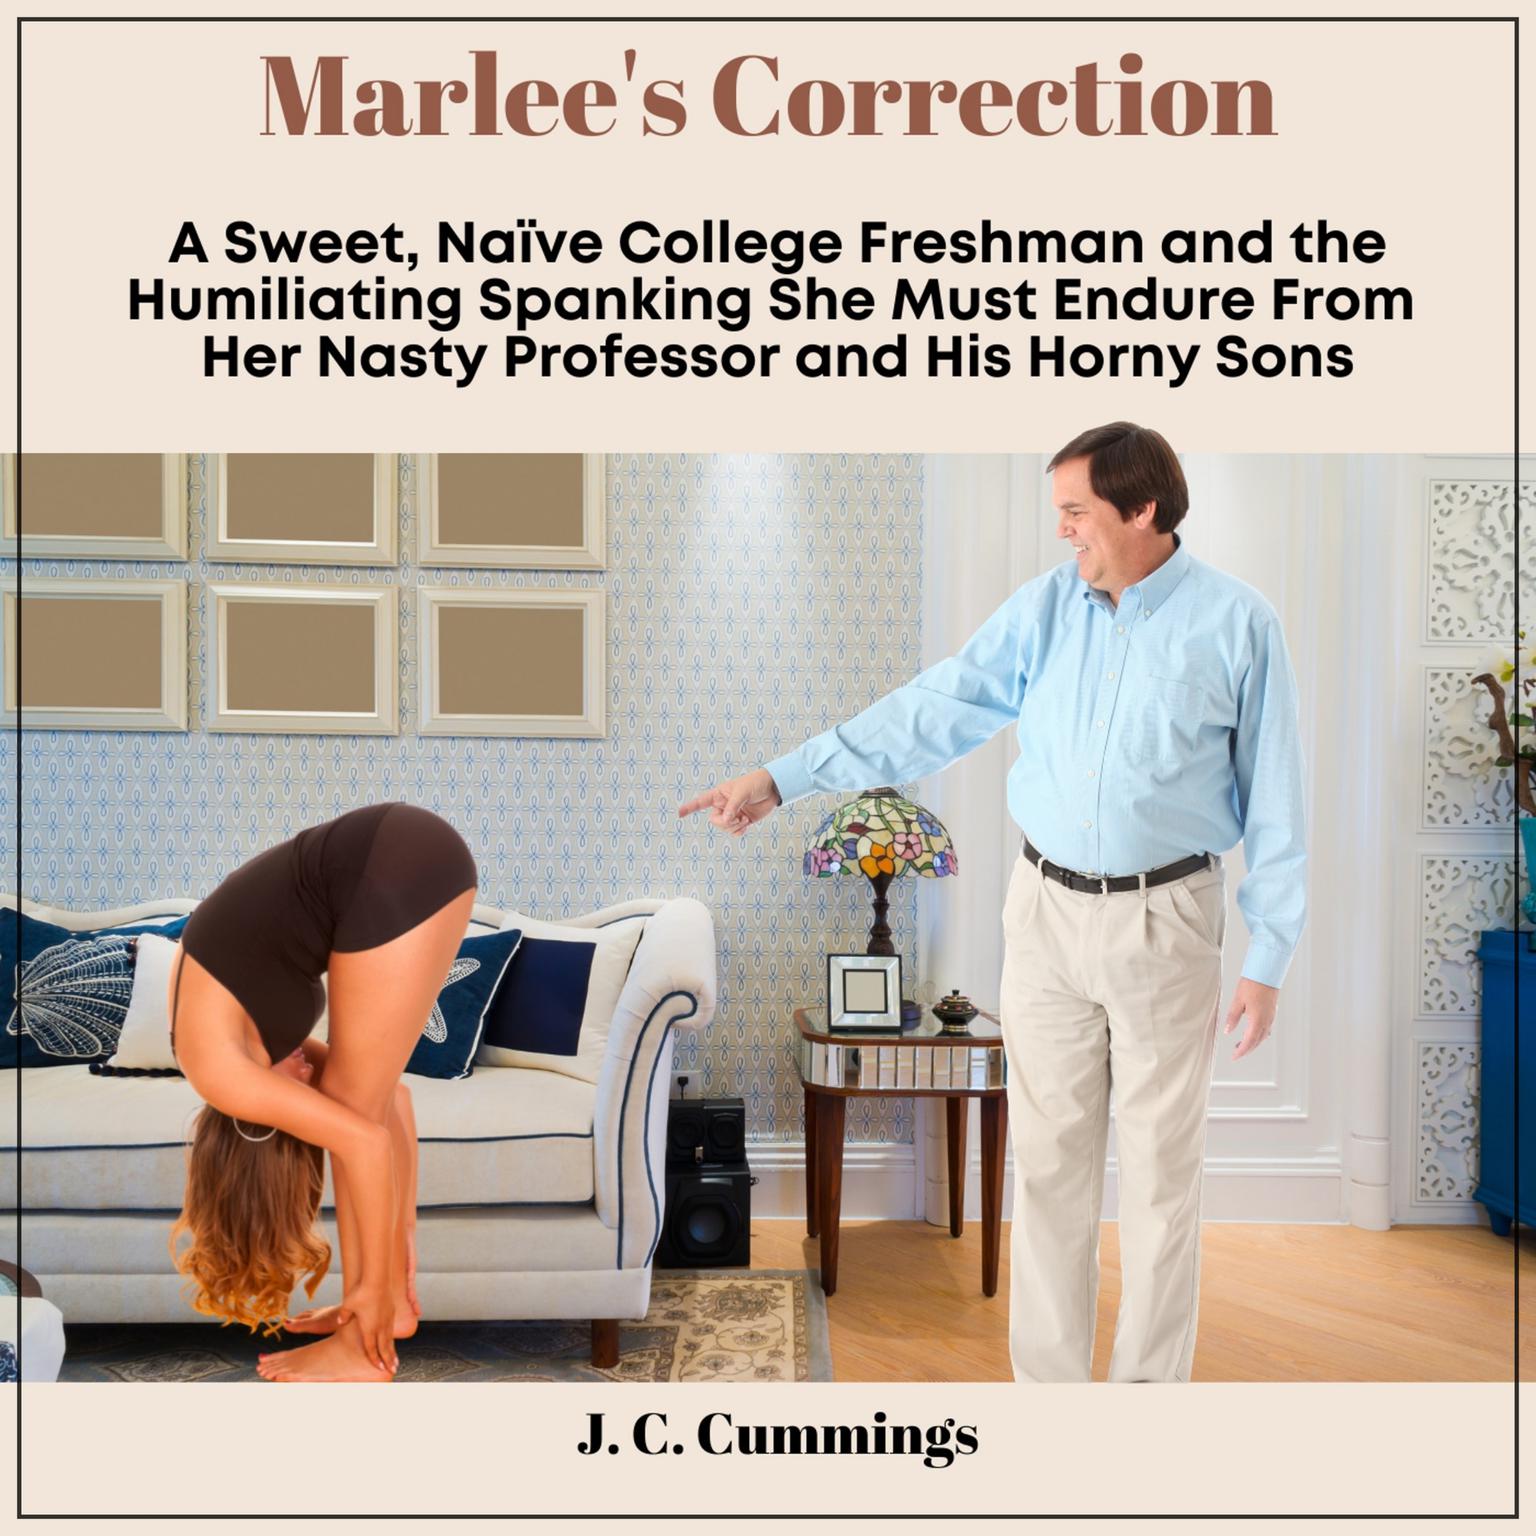 Marlees Correction: A Sweet, Naive College Freshman and the Humiliating Spanking She Must Endure From Her Nasty Professor and His Horny Sons Audiobook, by J.C. Cummings